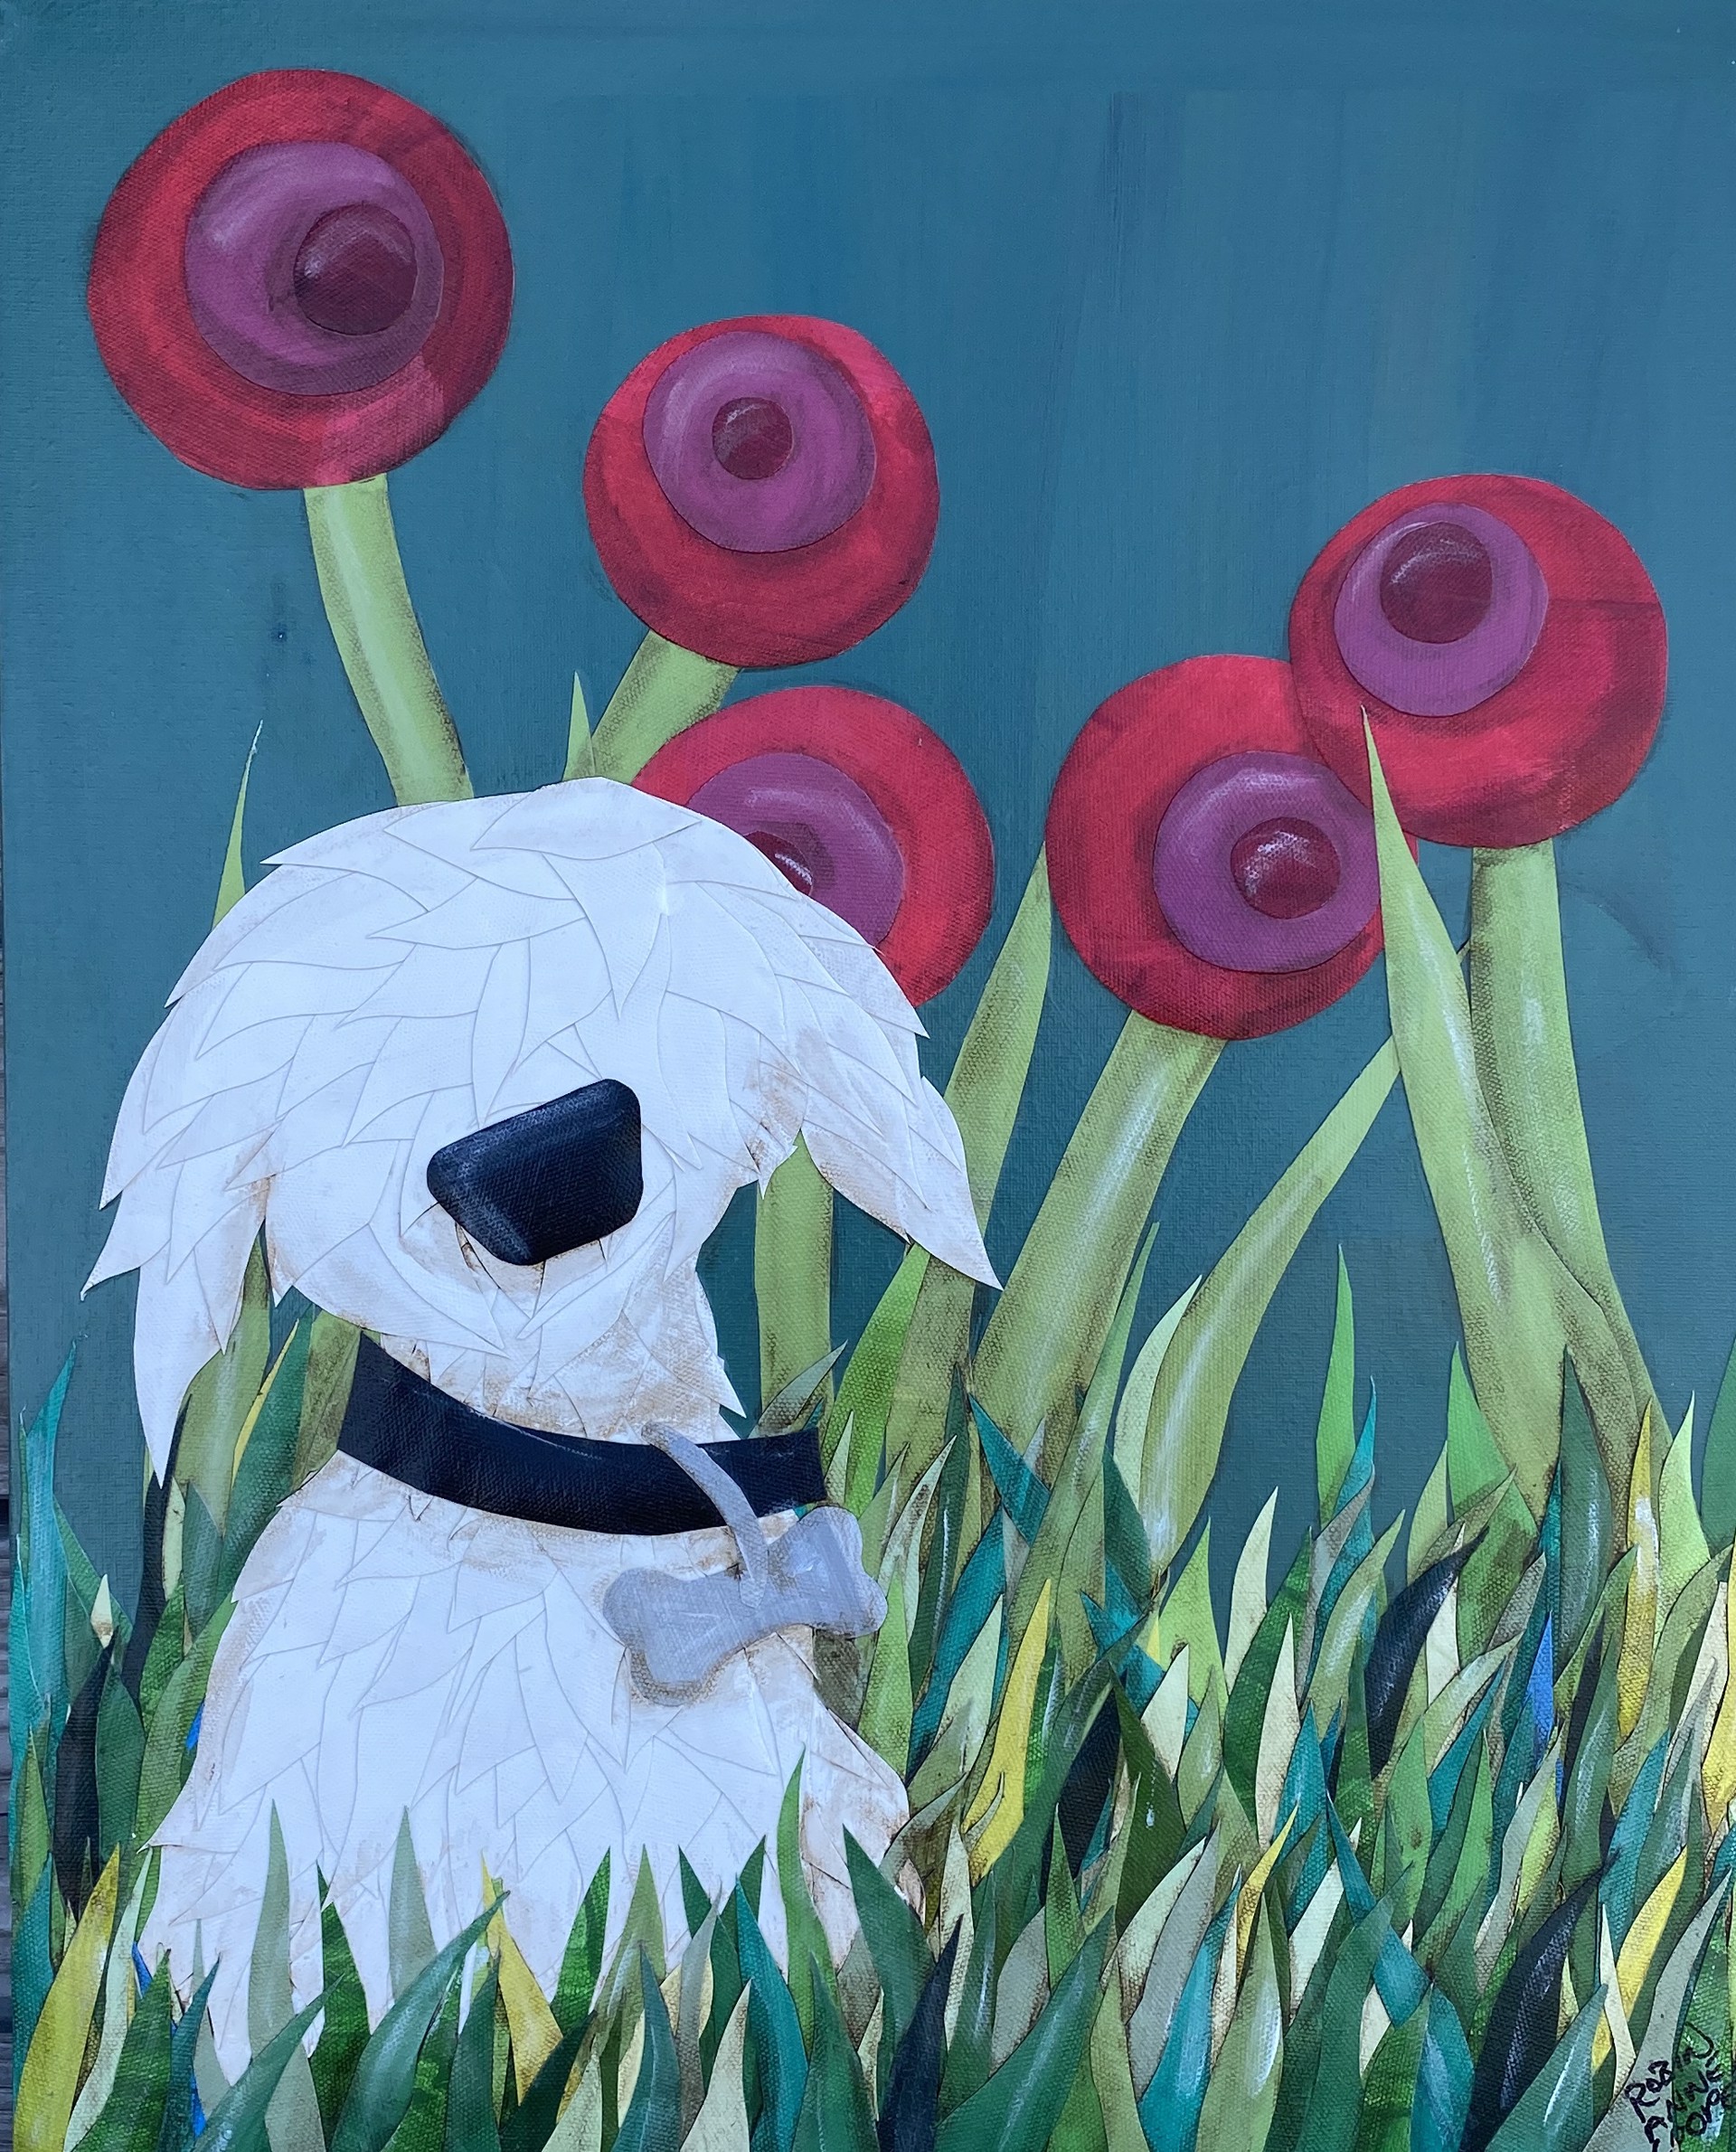 Dog Stopping To Smell The Roses by Robin Cooper